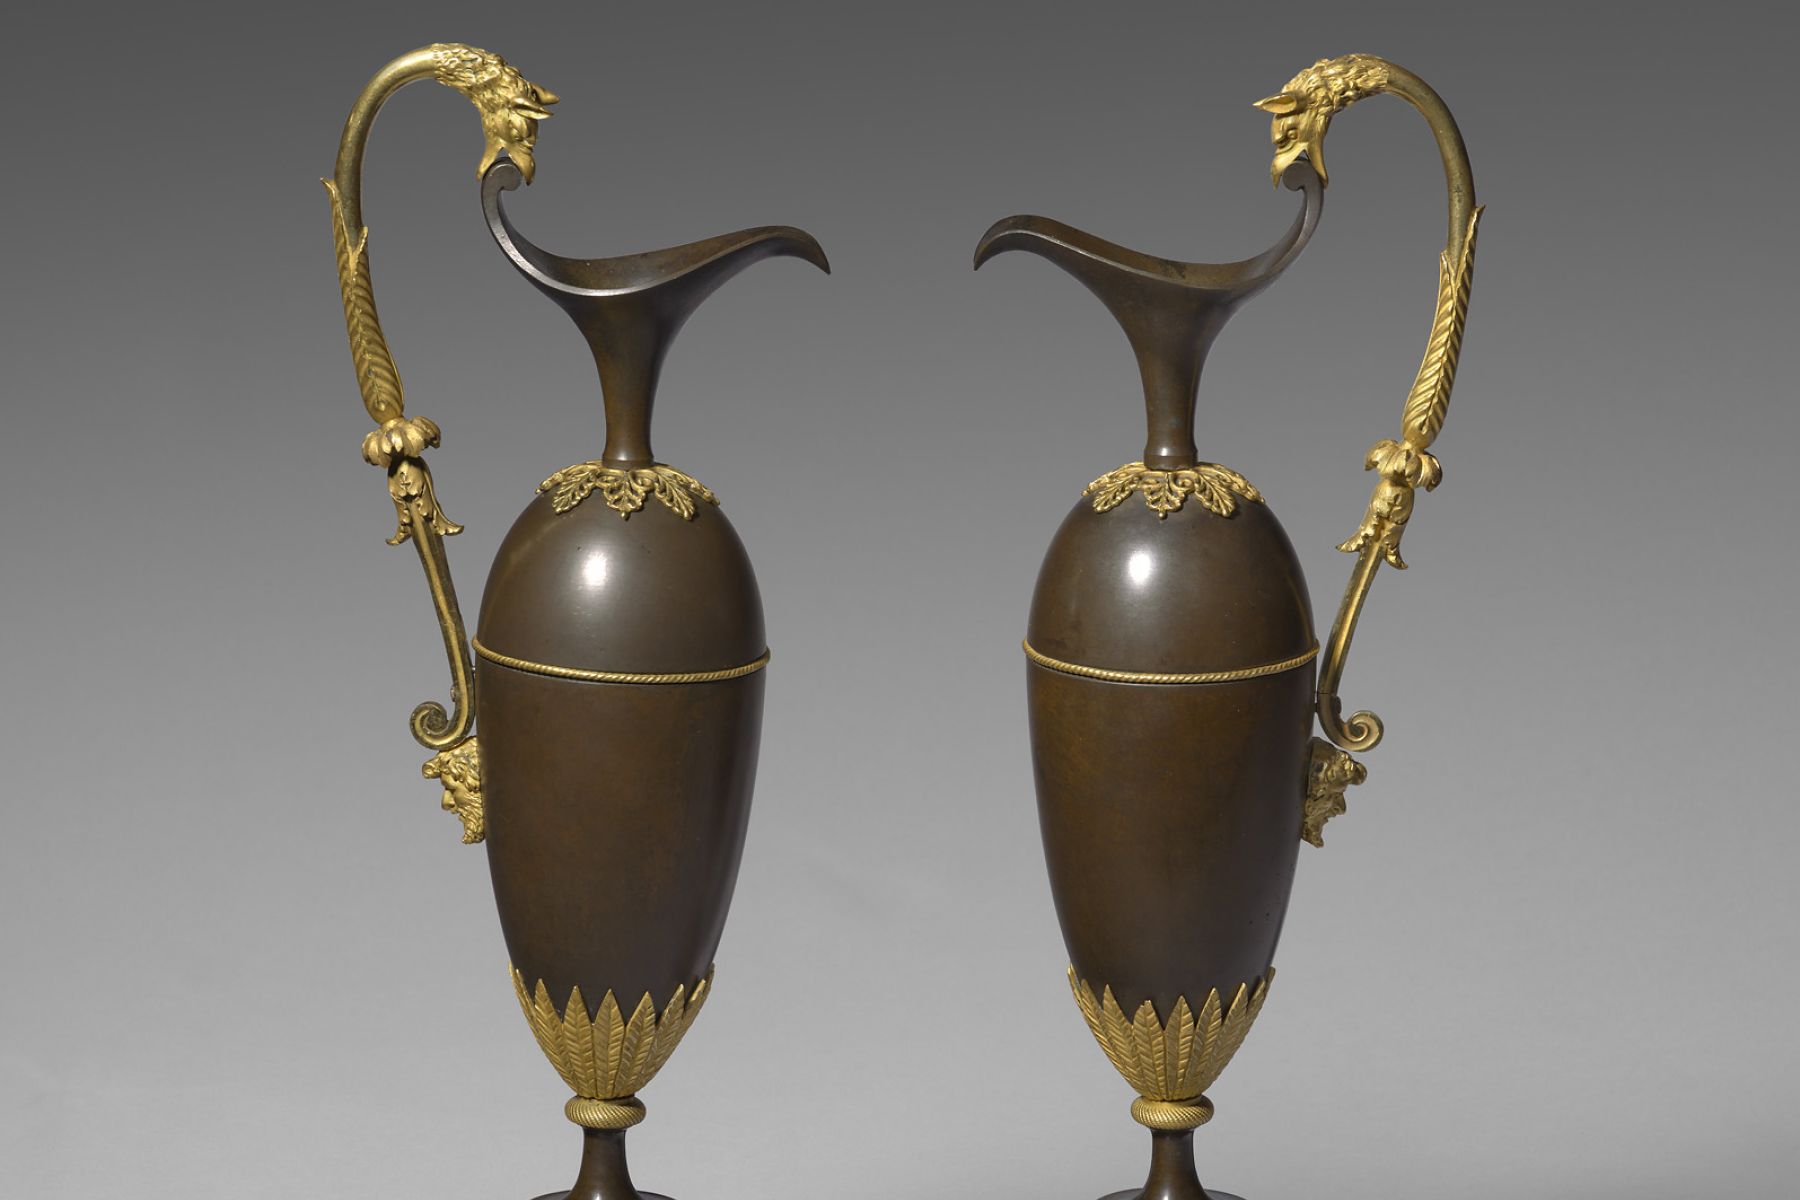 A pair of Empire period ewers